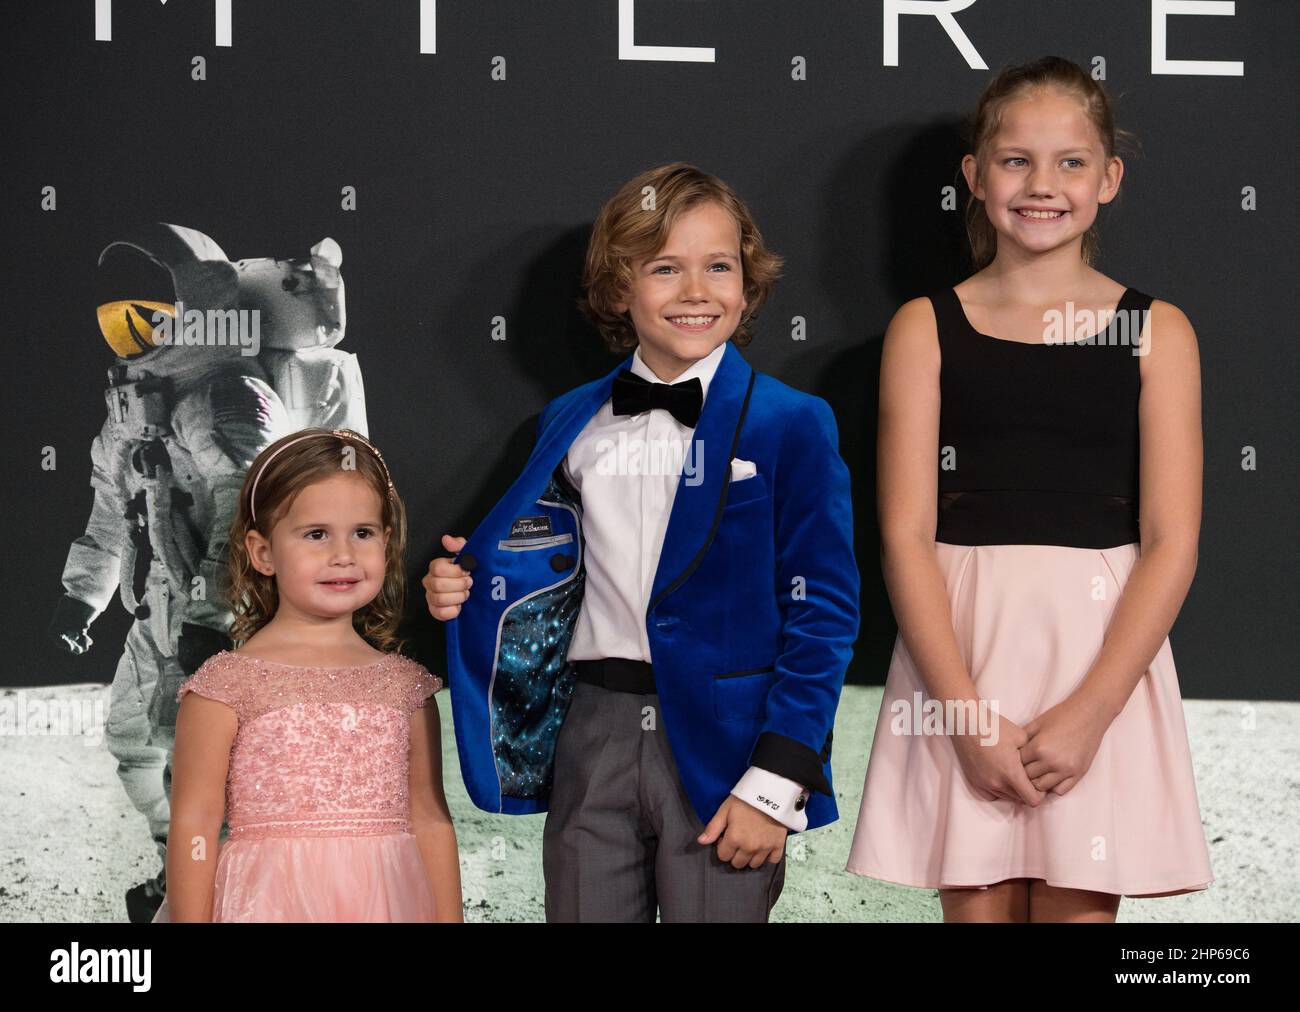 From left to right, American actress Lucy Brooke Stafford, American actor Gavin Warren, and American actress Claire Smith arrive on the red carpet for the premiere of the film 'First Man' at the Smithsonian National Air and Space Museum Thursday, Oct. 4, 2018 in Washington. The film is based on the book by Jim Hansen, and chronicles the life of NASA astronaut Neil Armstrong from test pilot to his historic Moon landing. Stock Photo